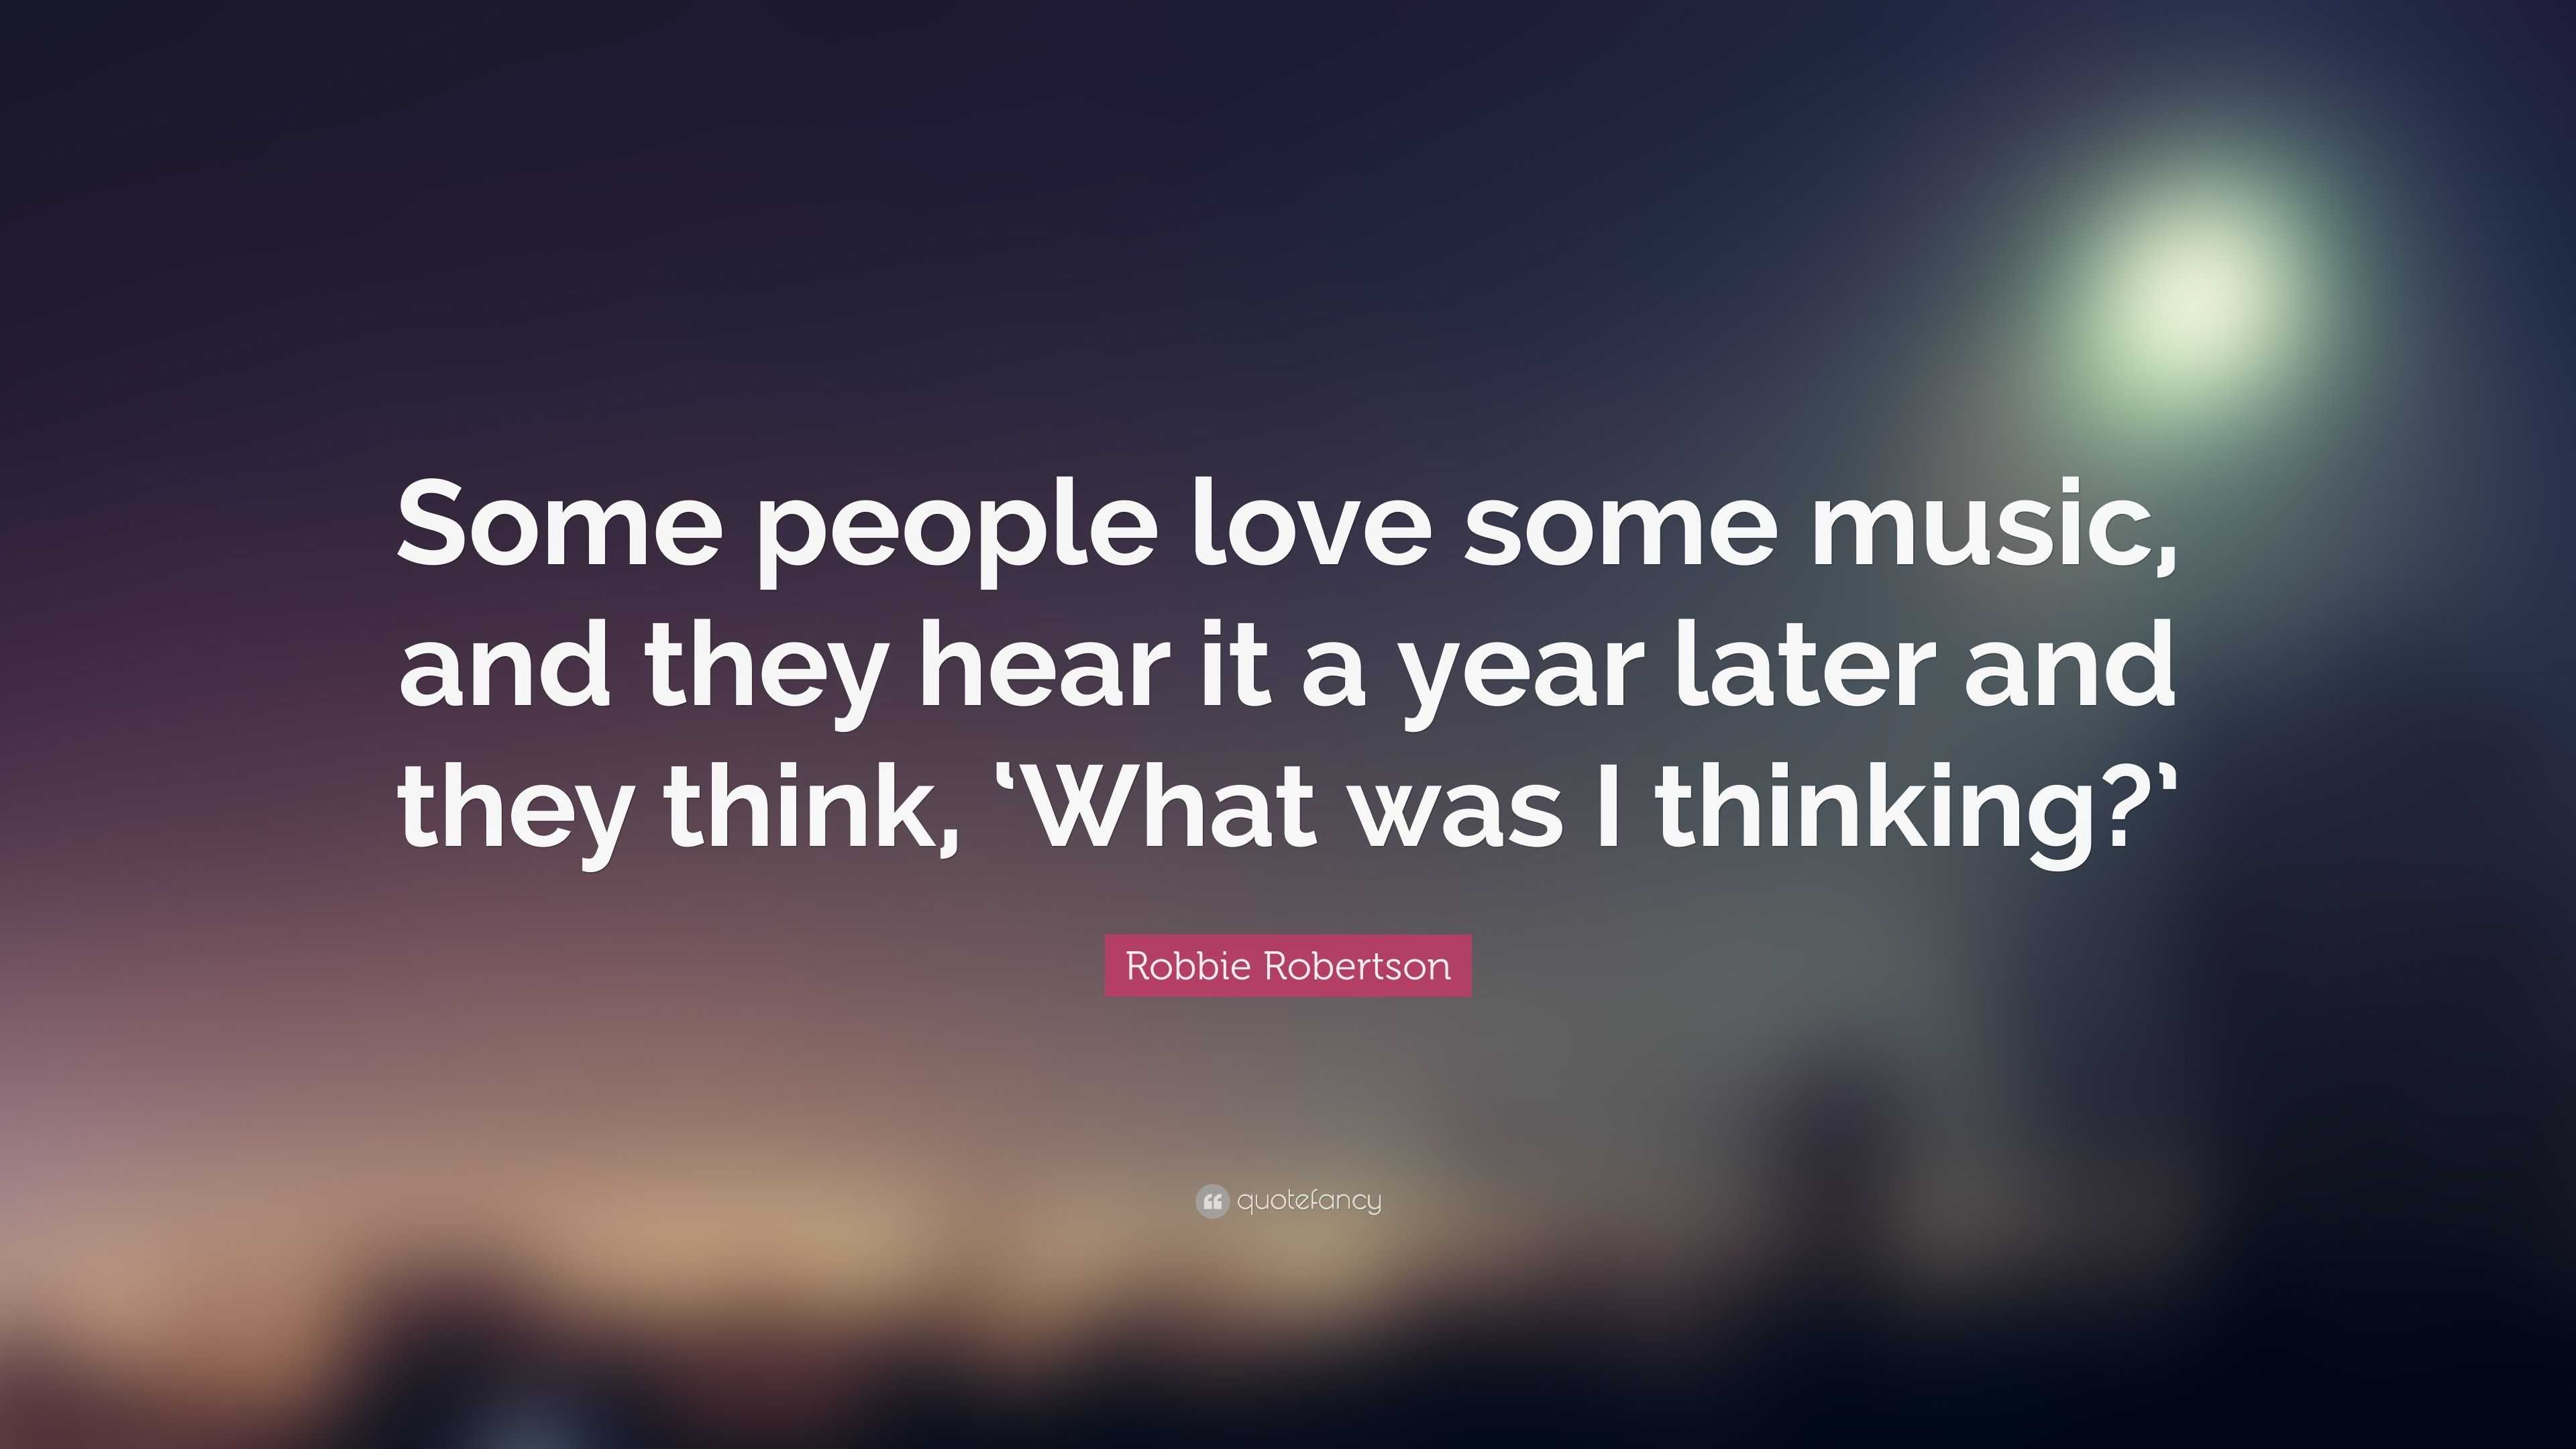 Robbie Robertson Quote: “Some people love some music, and they hear it ...